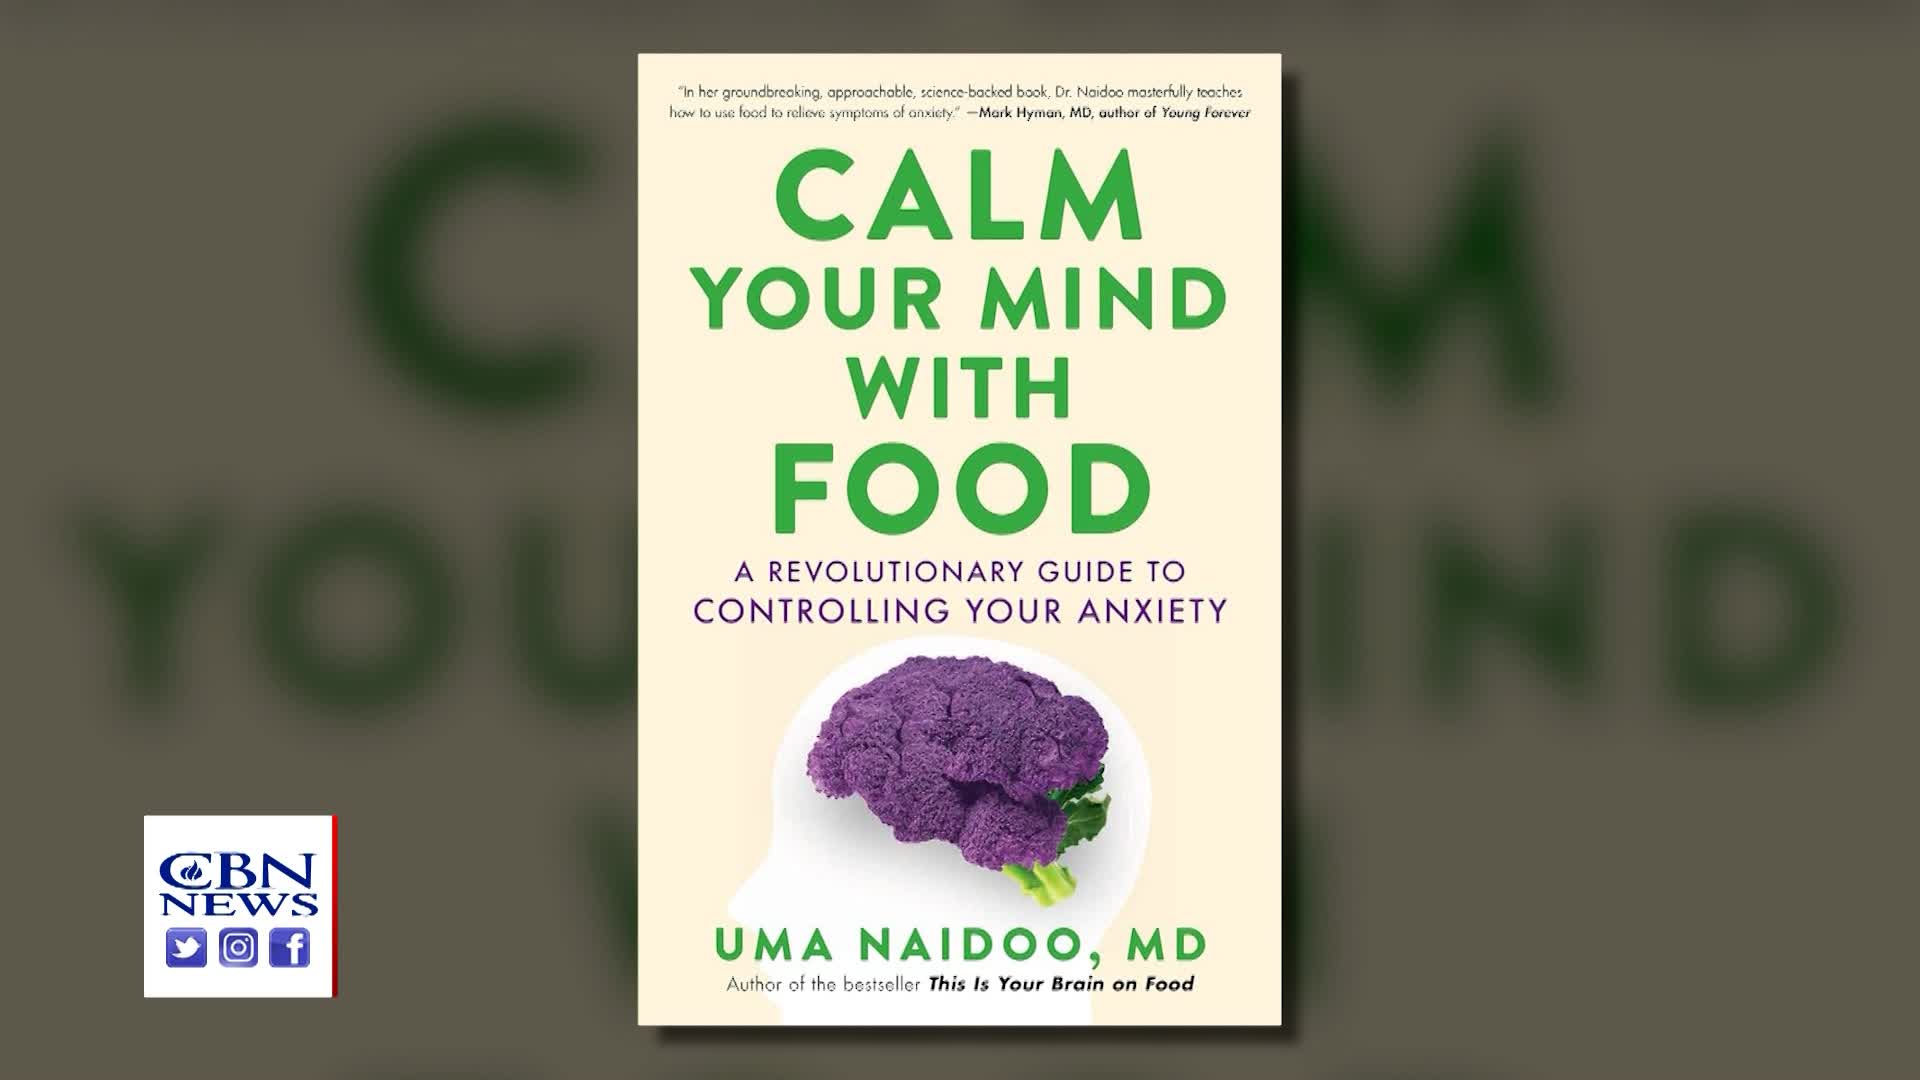 Calm Your Mind with Food by Uma Naidoo, MD